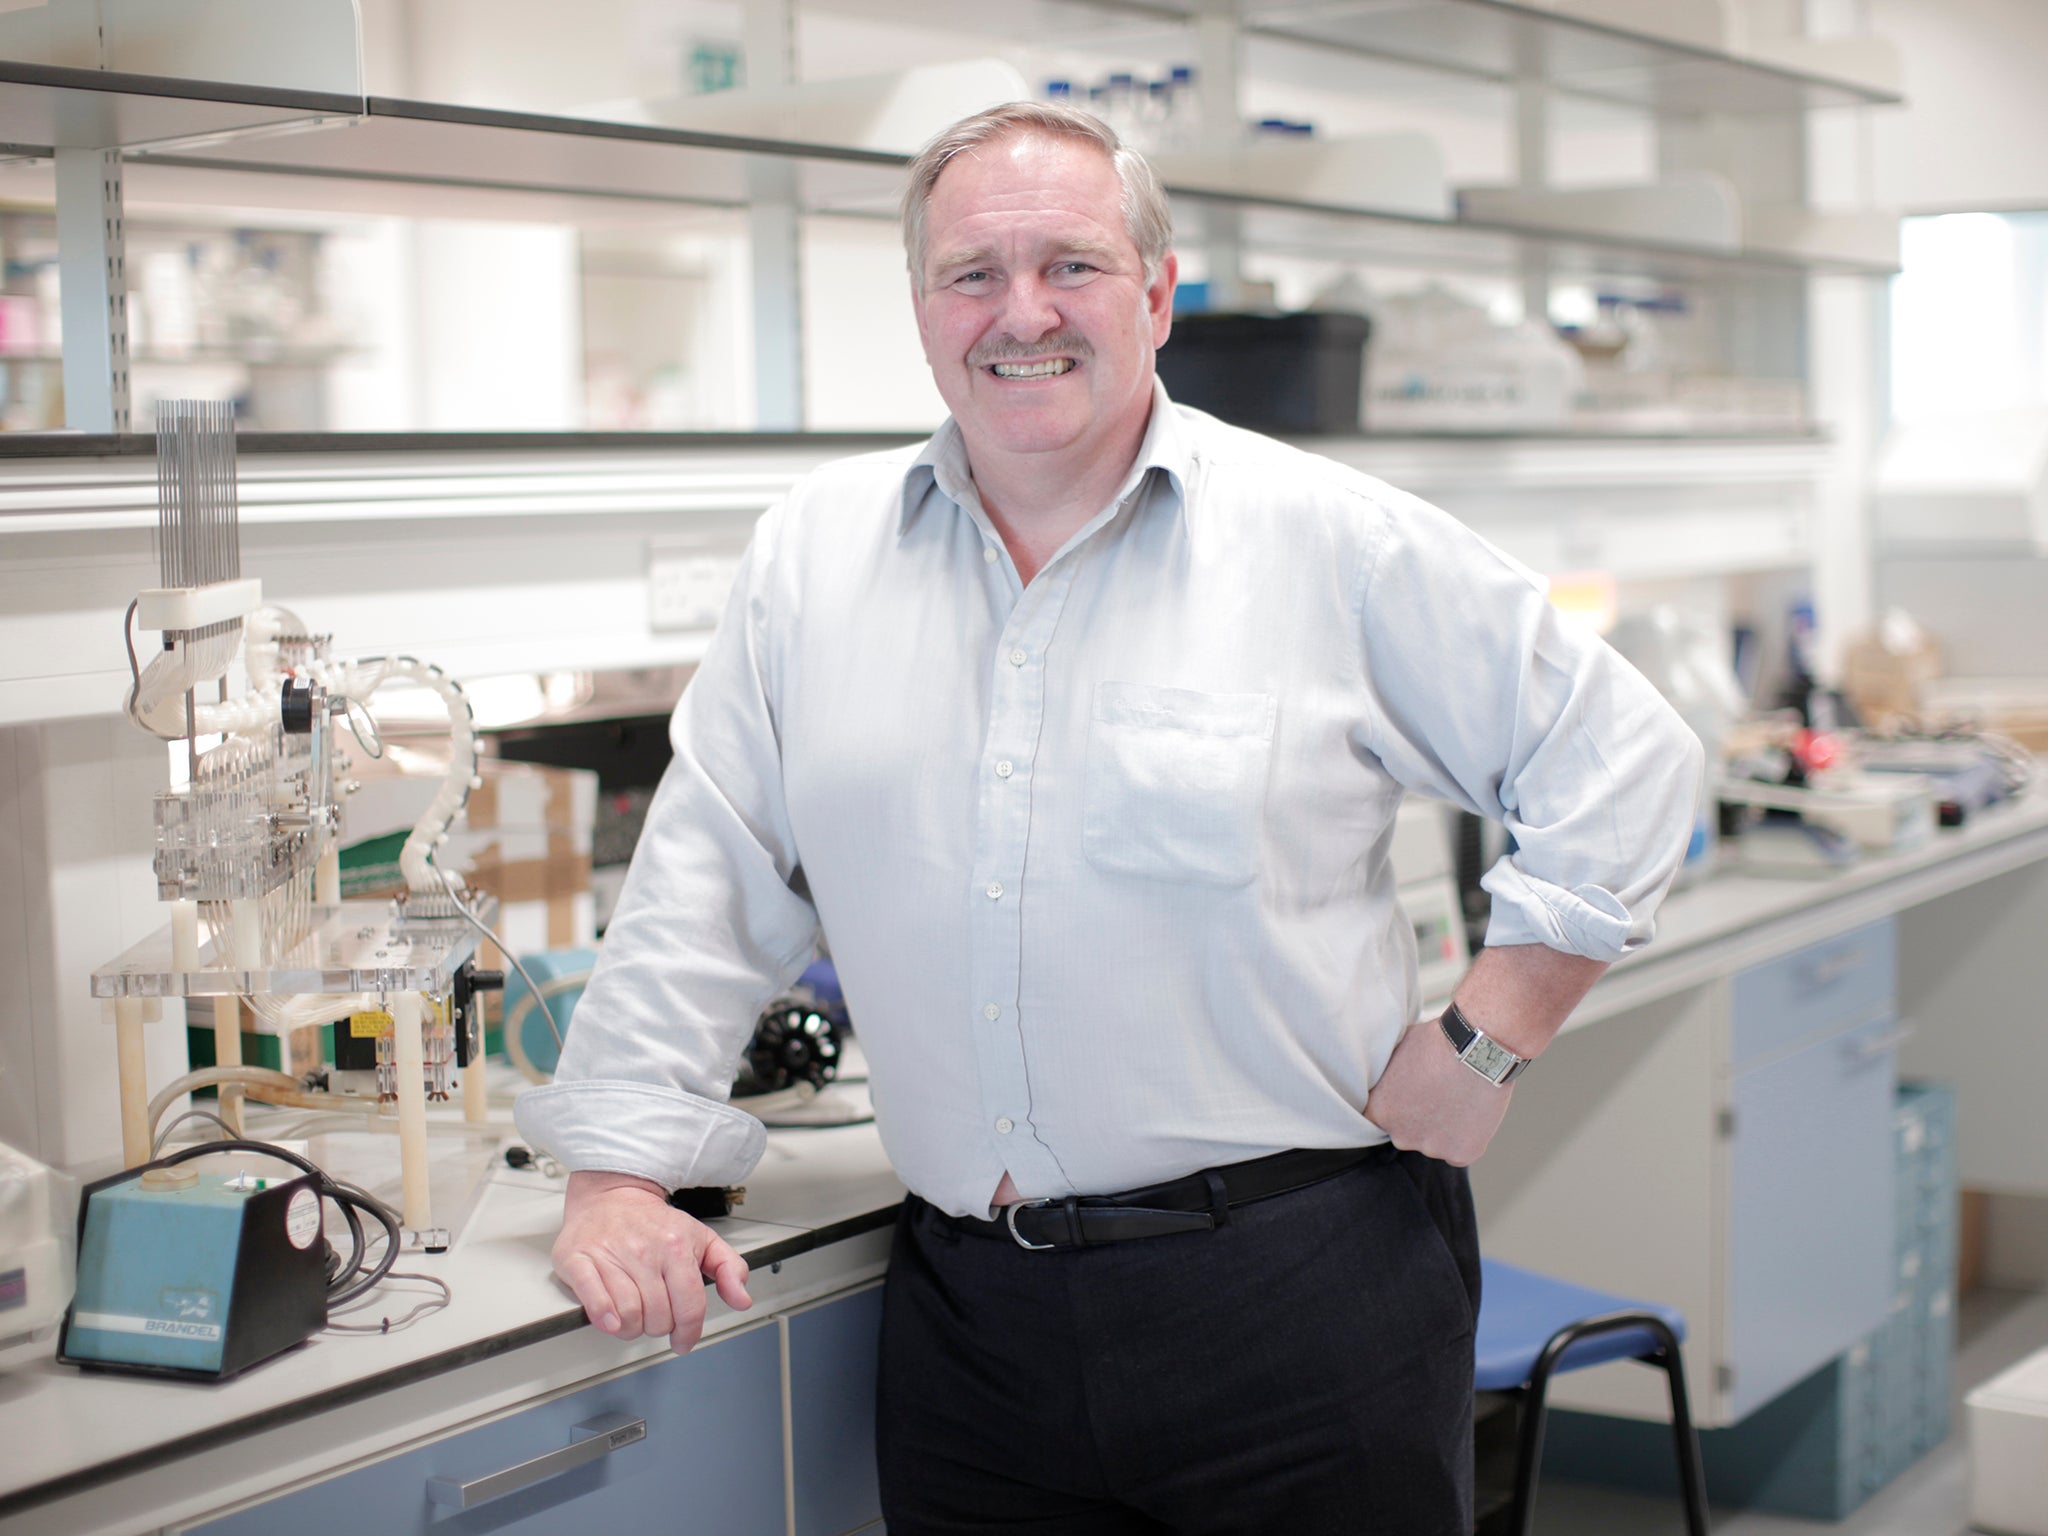 Professor David Nutt wants to change the way gravely ill patients are treated in Britain